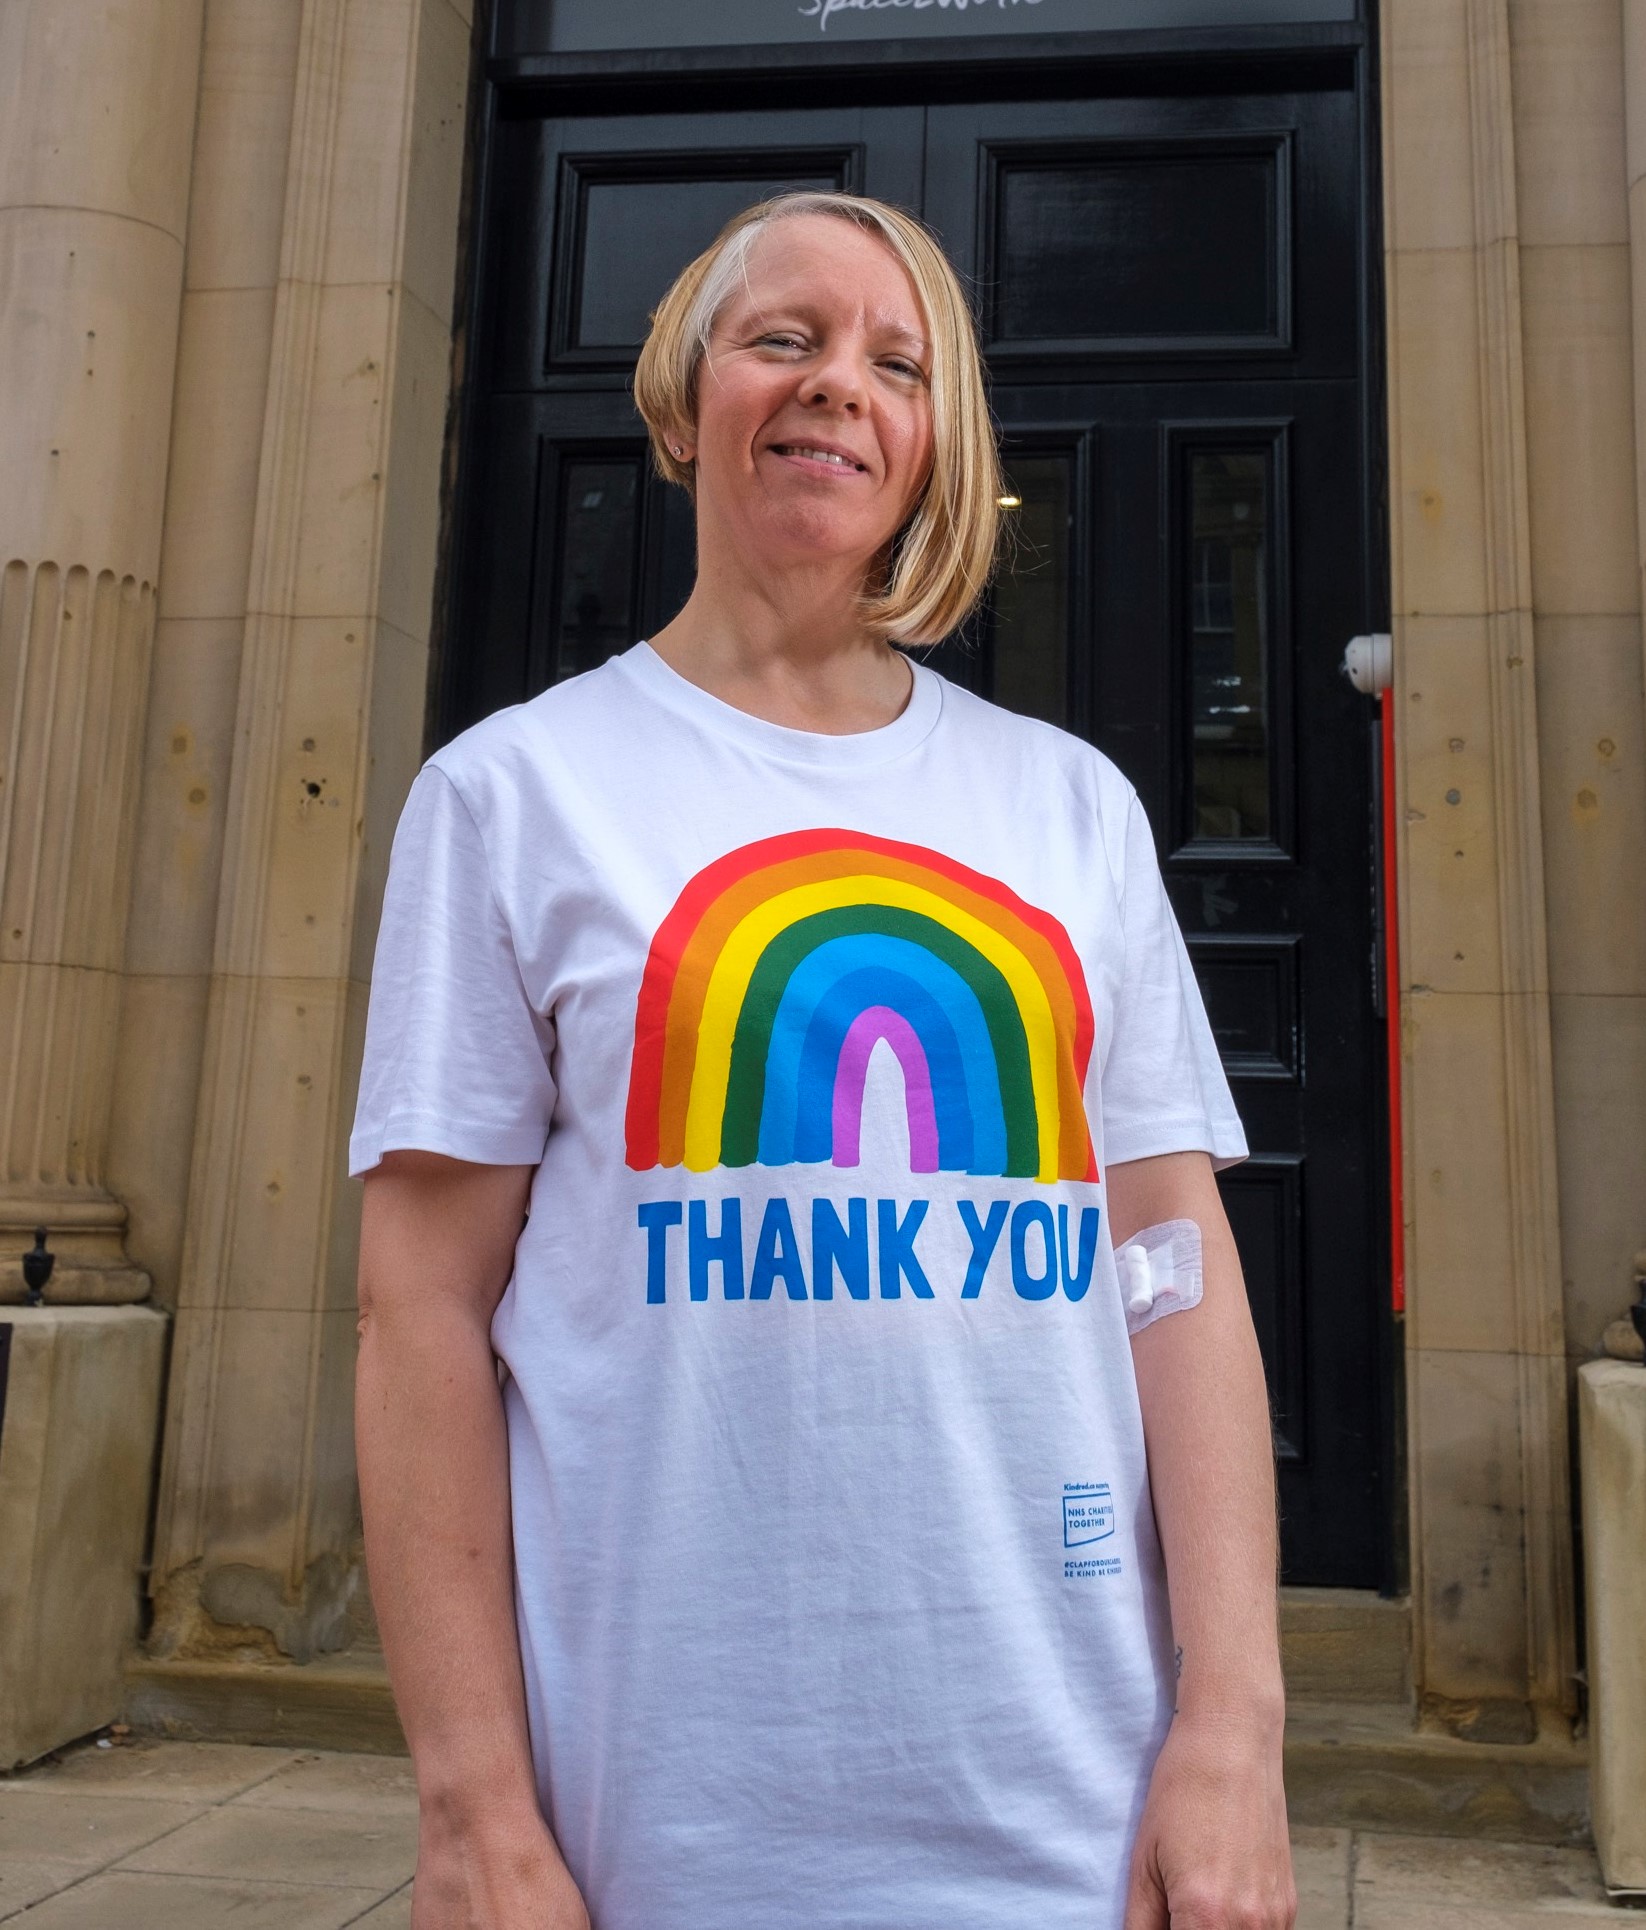 Karen wearing a white T shirt which says Thank you on it with a rainbow